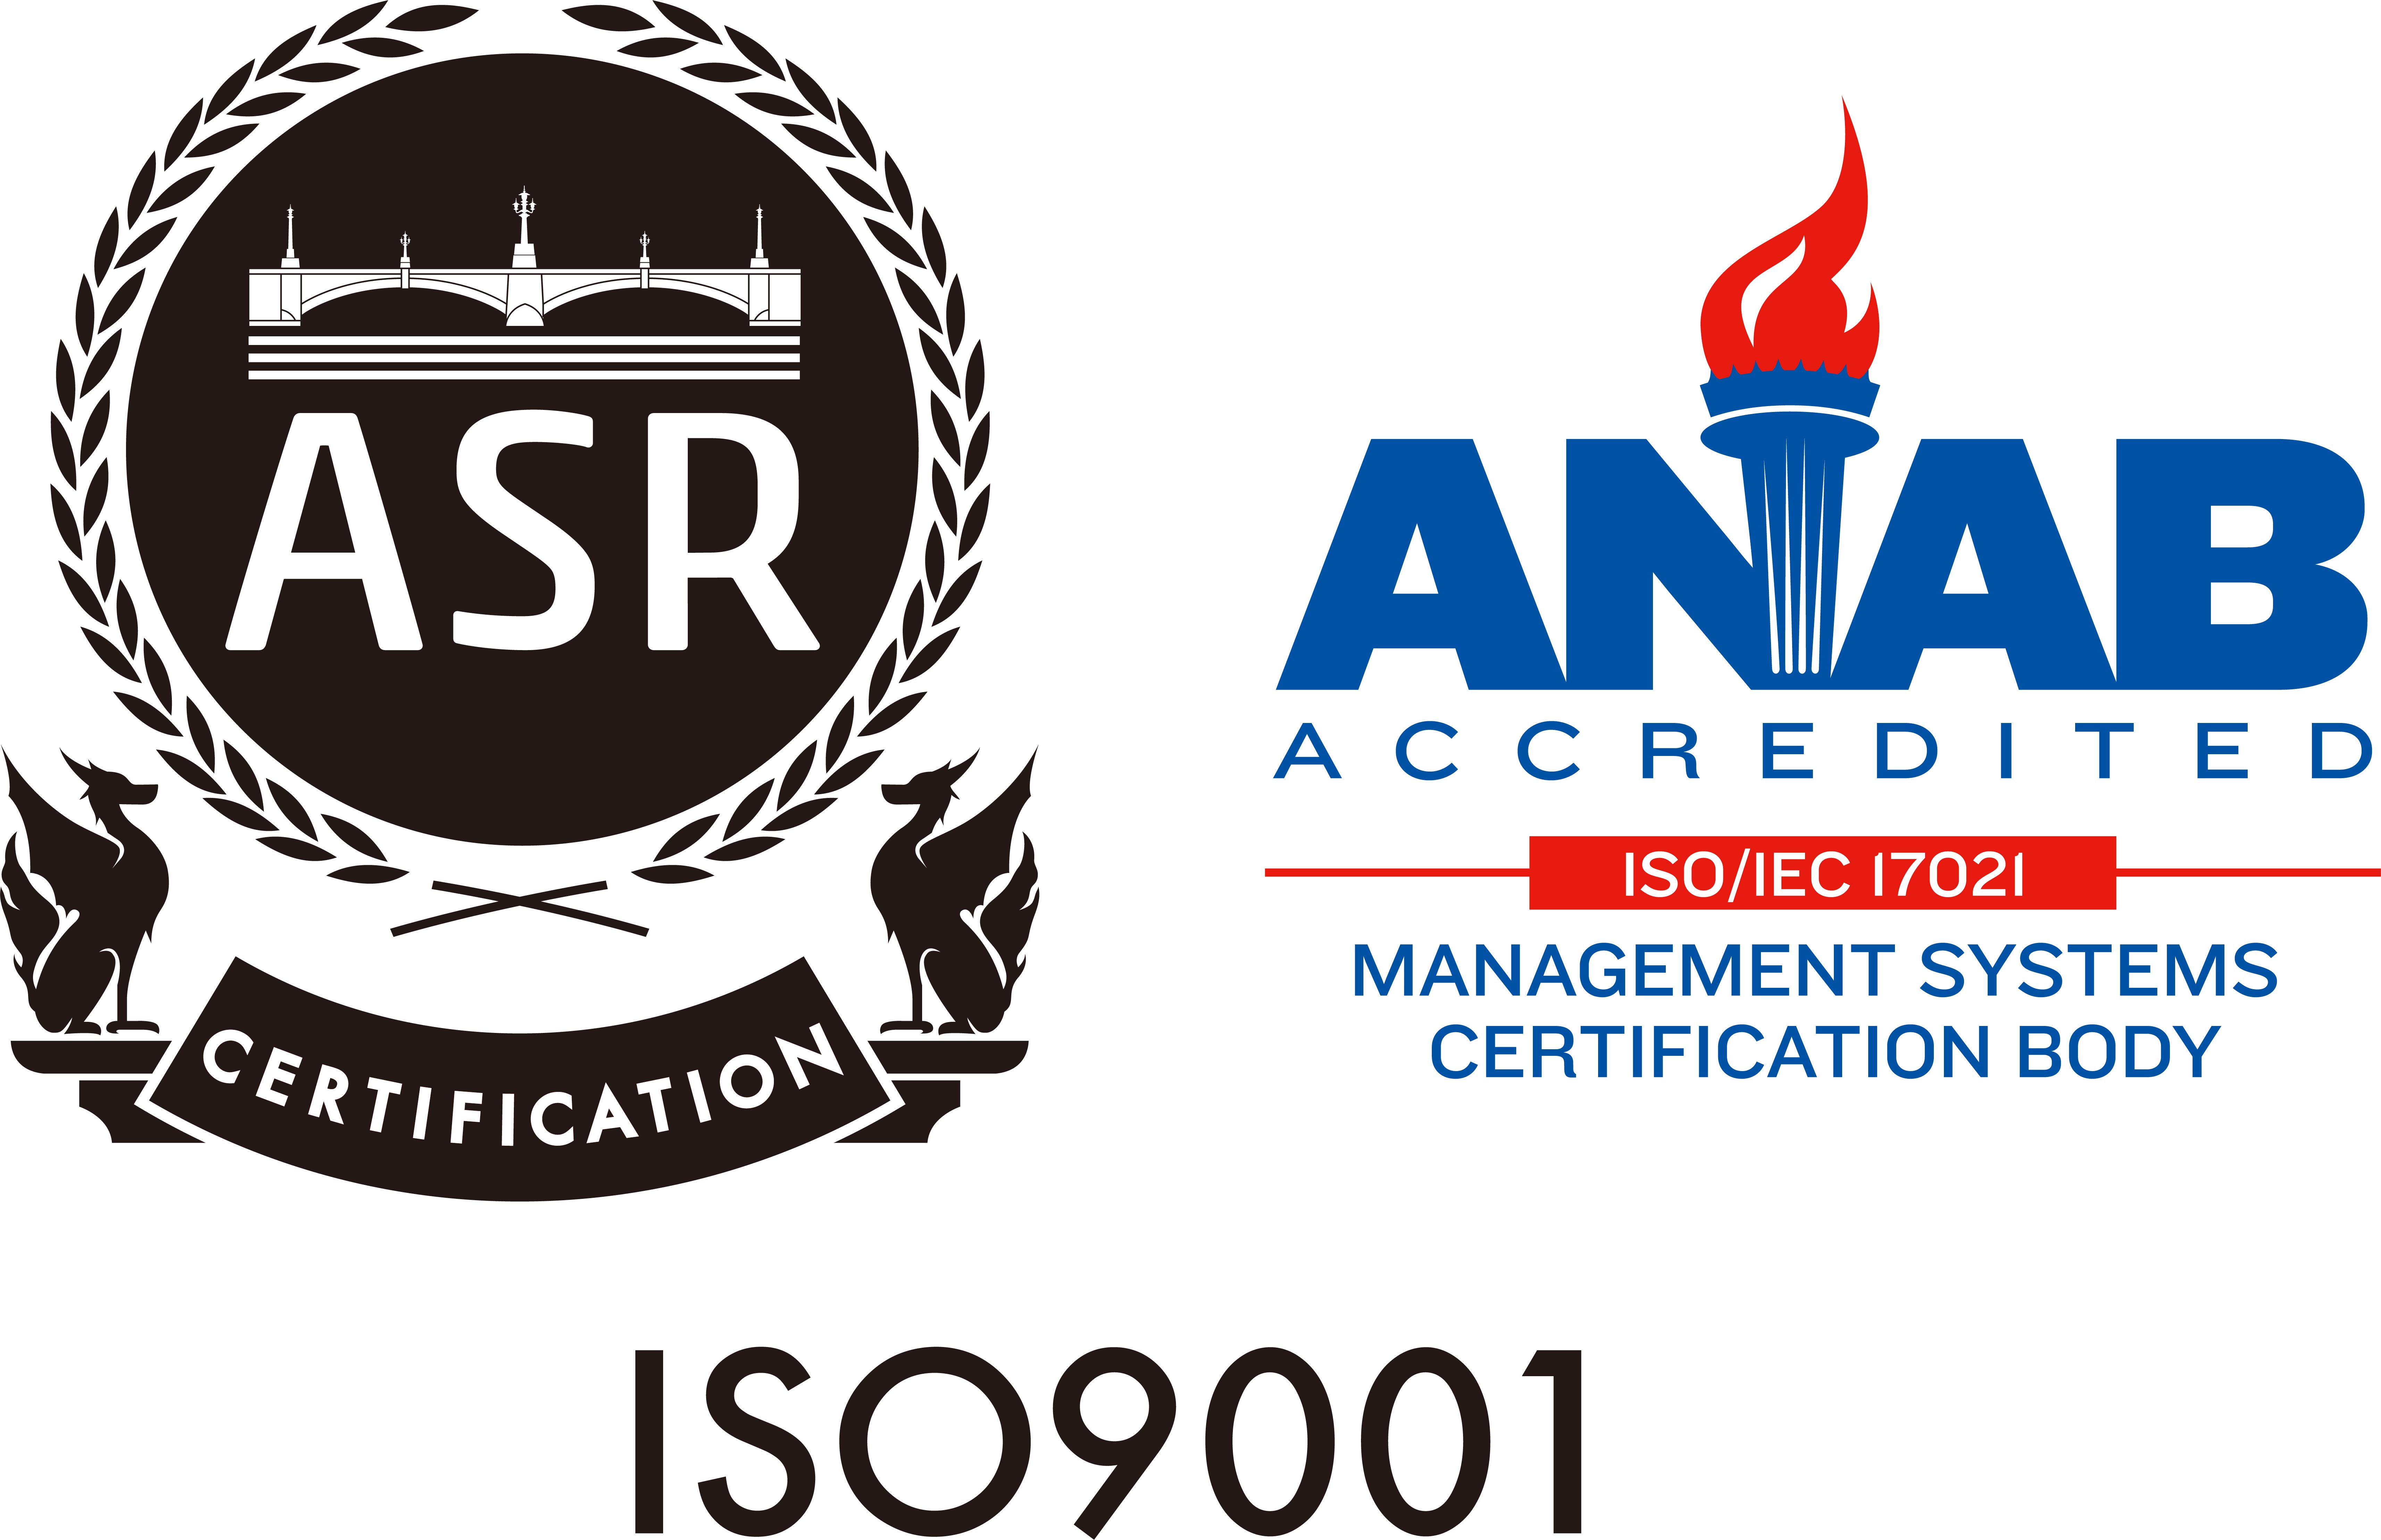 ASR CERTIFICATION ANAB ACCREDITED ISO/IEC I7021 MANAGEMENT SYSTEMS CERTIFICATION BODY ISO9001